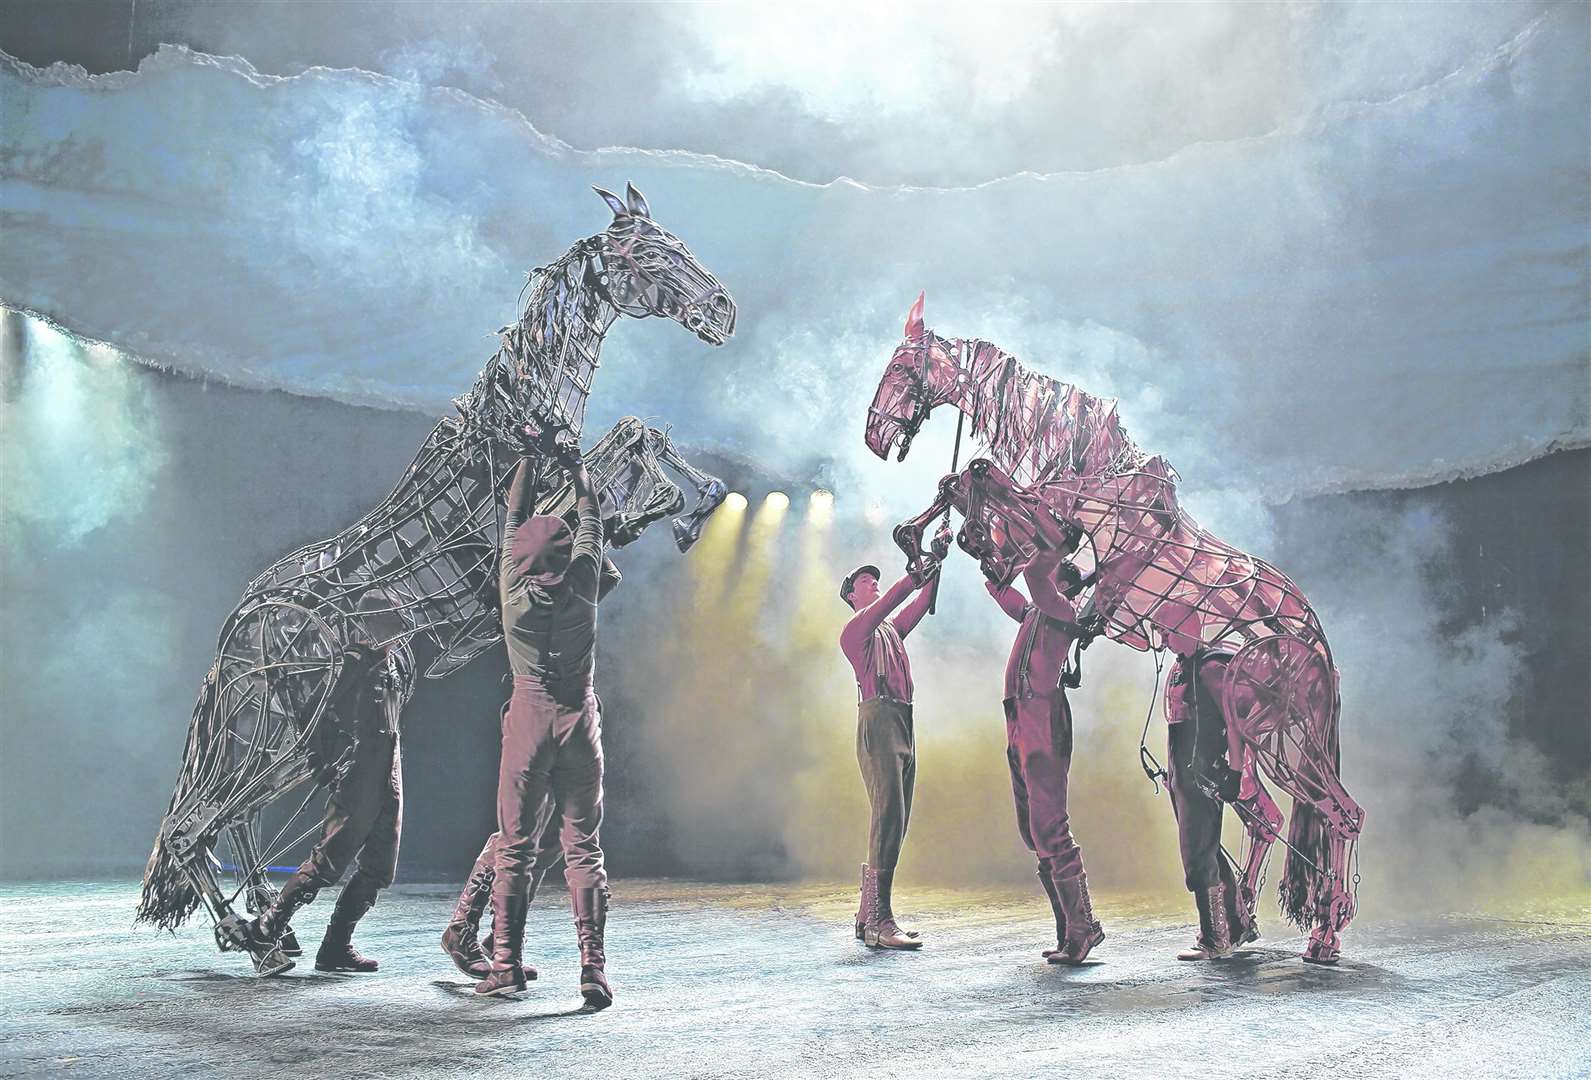 The National Theatre's War Horse was at the Marlowe for its 10th anniversary last year